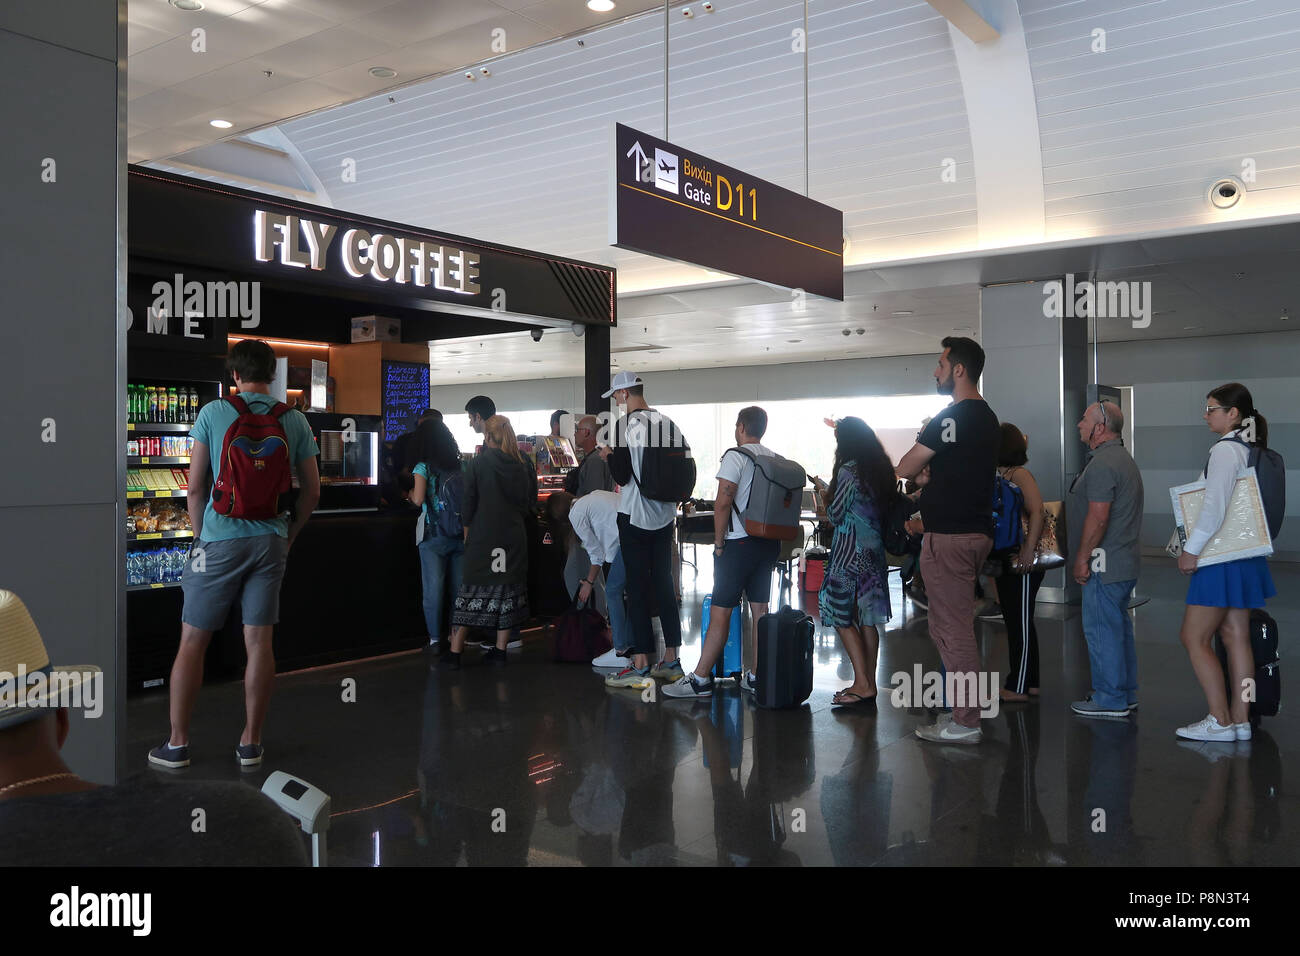 Travelers wait in line to buy coffee at Boryspil International Airport east of Kiev capital of Ukraine Stock Photo